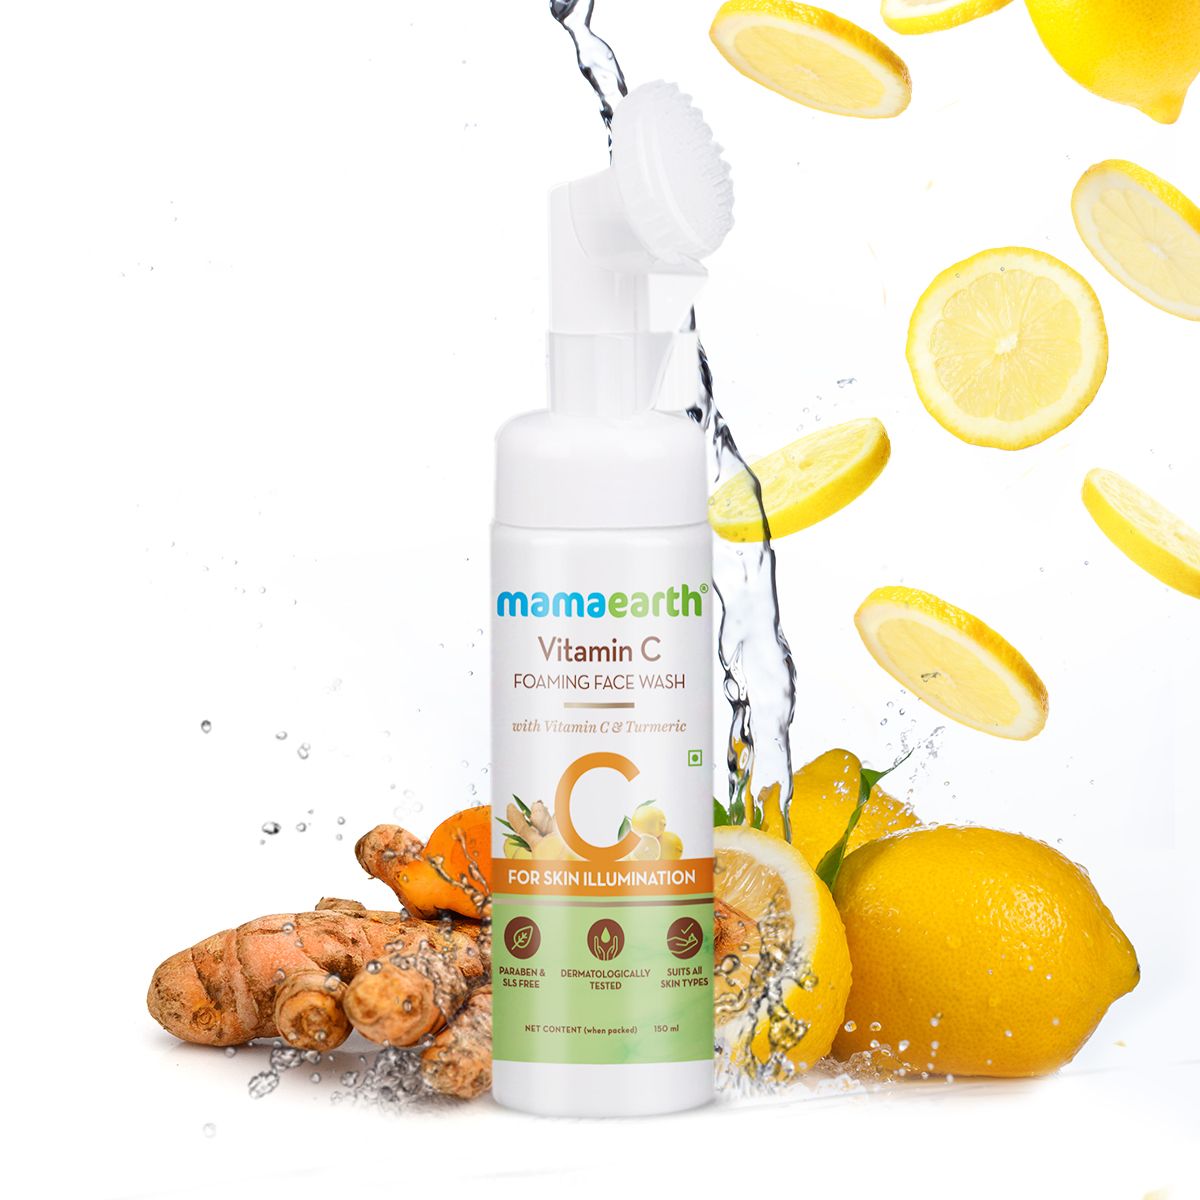 Why Is Mamaearth Vitamin C Foaming Face Wash Better Than Others Available In The Market